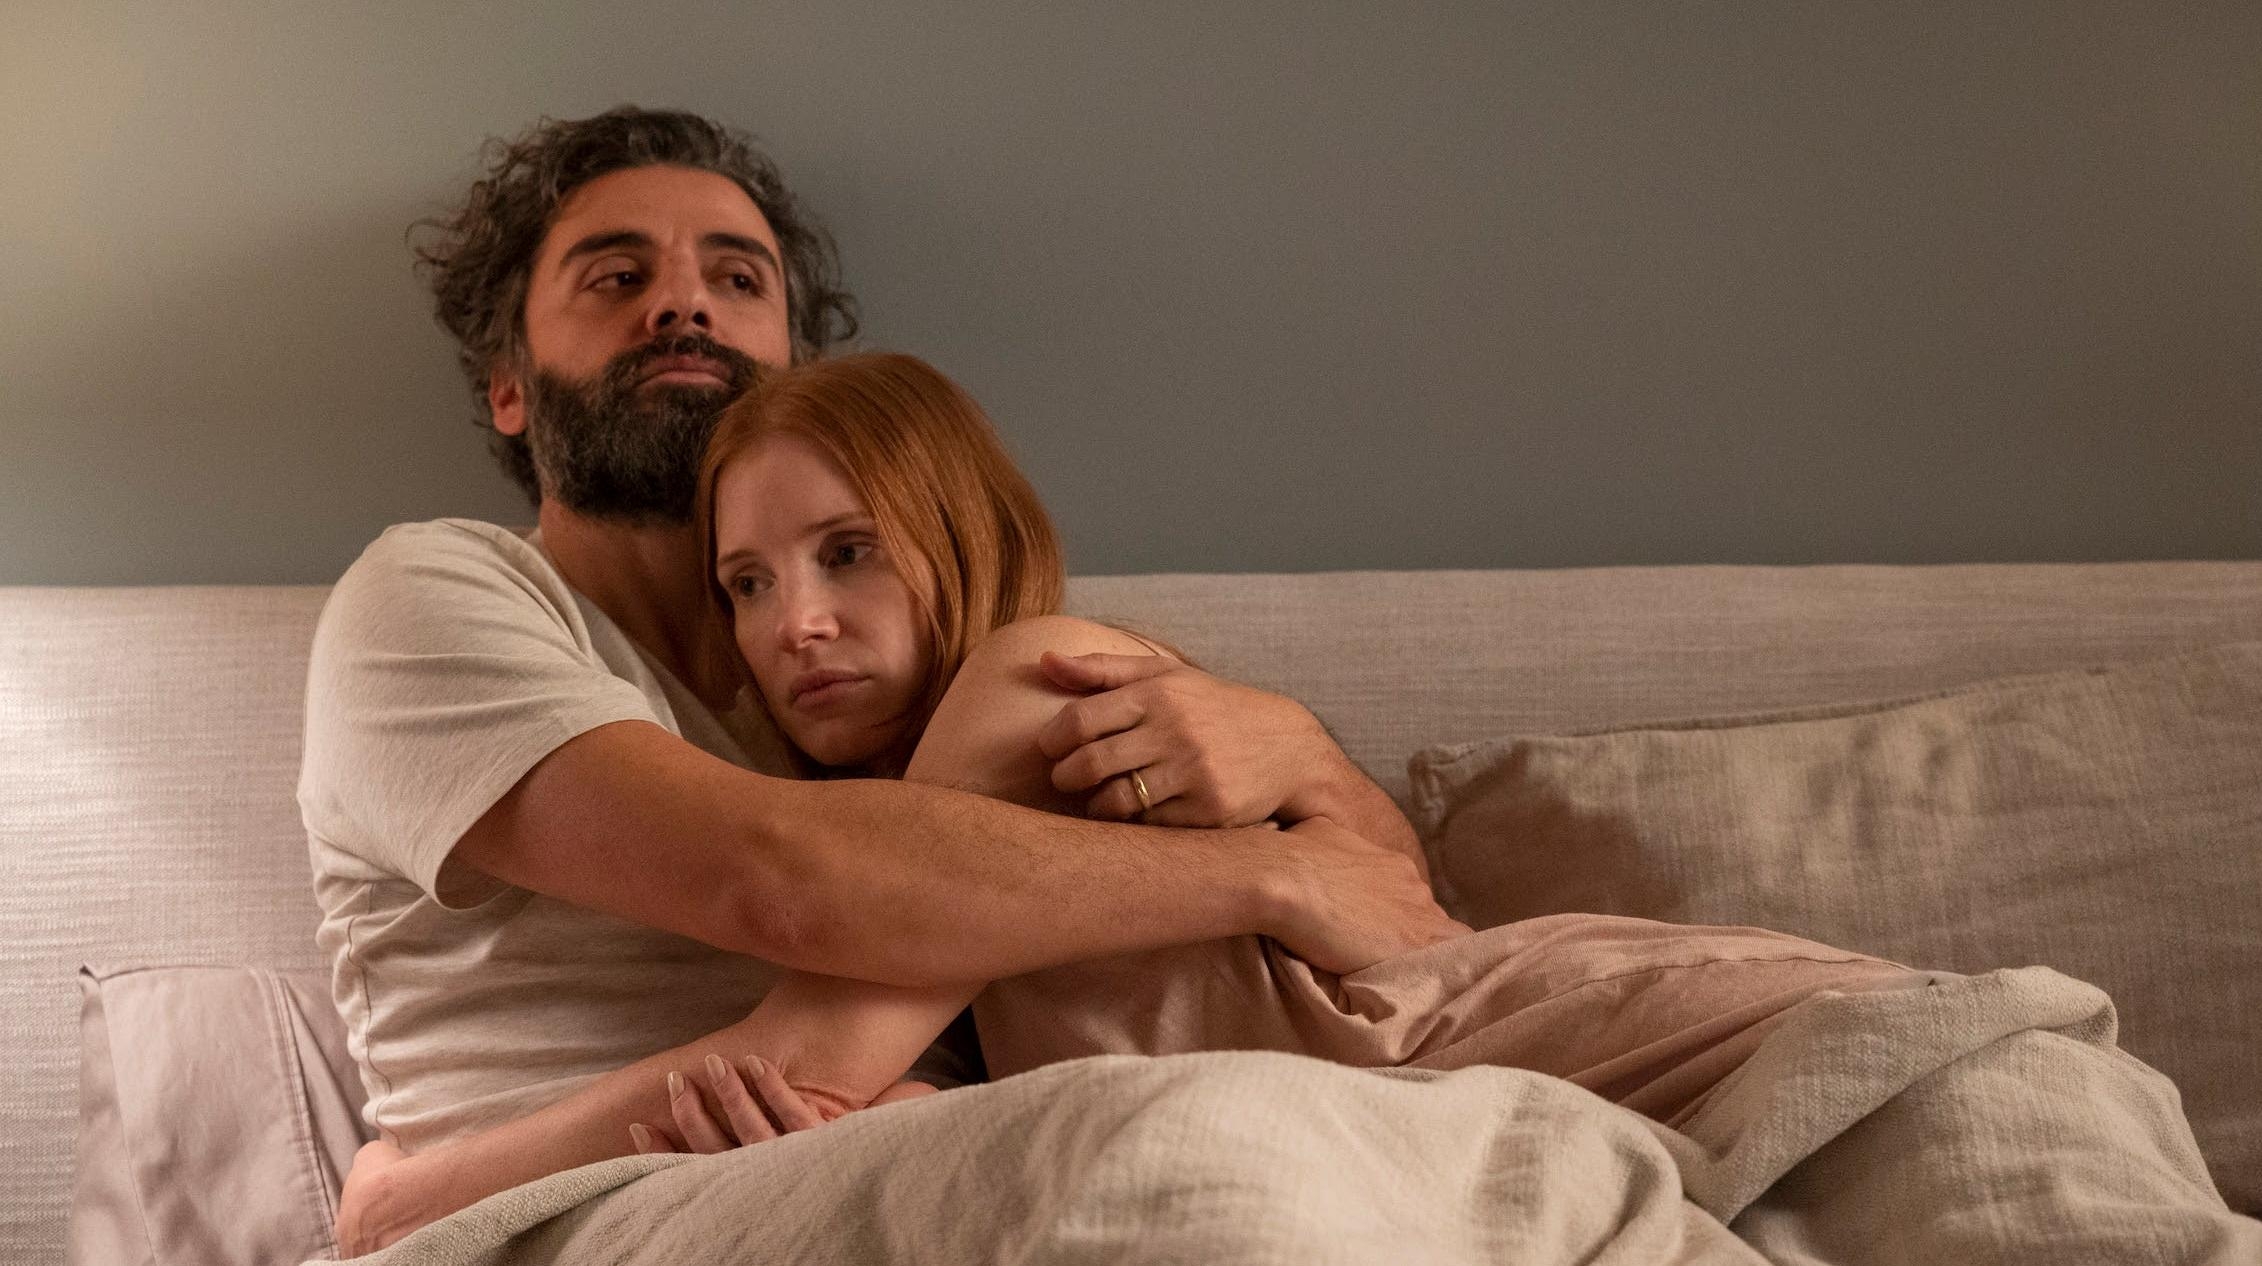 Oscar Isaac and Jessica Chastain are a hot, moody couple in HBO's Scenes From A Marriage trailer